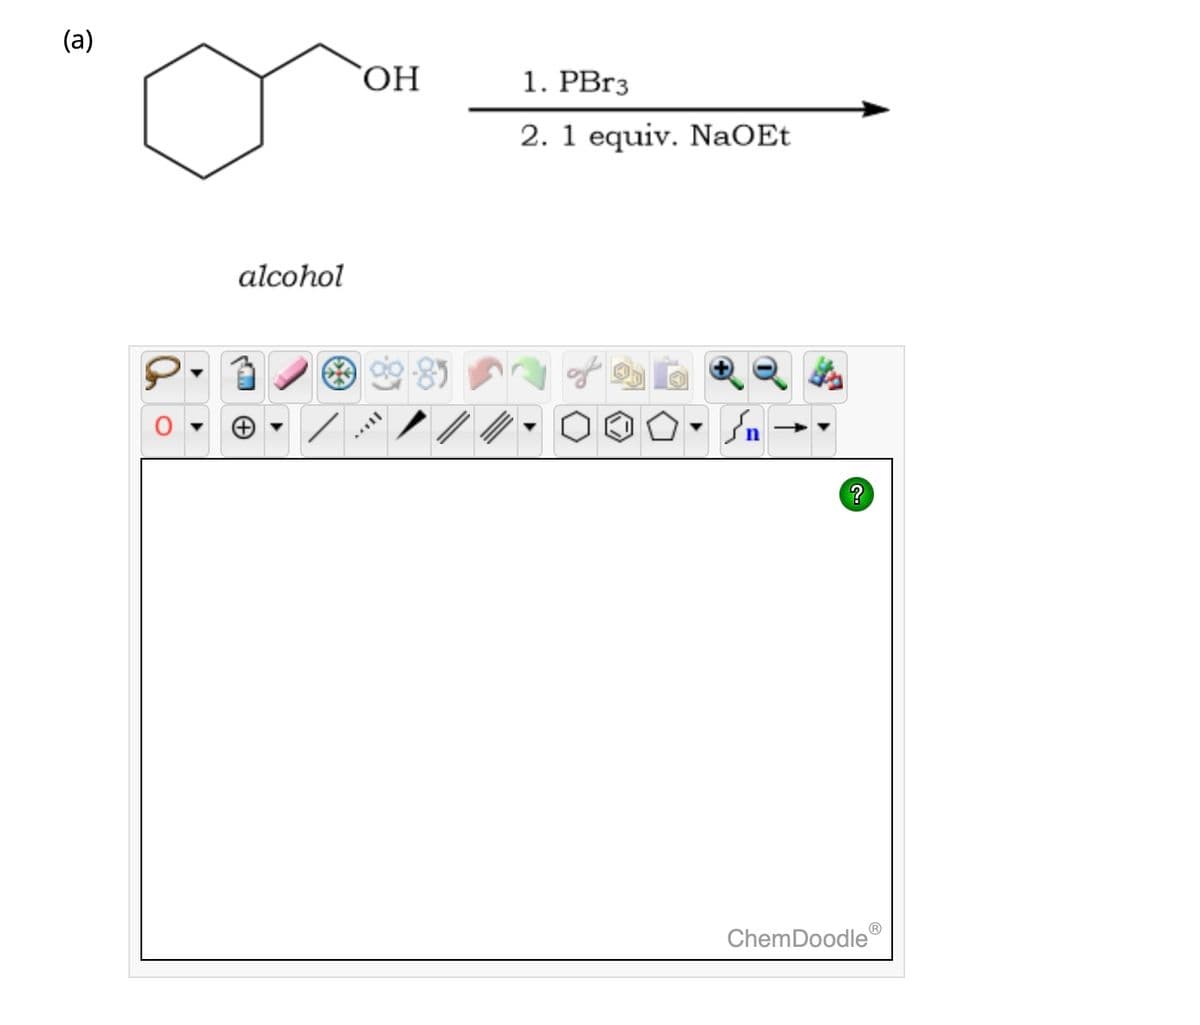 (a)
alcohol
OH
1. PBr3
2. 1 equiv. NaOEt
of
در
?
ChemDoodleⓇ